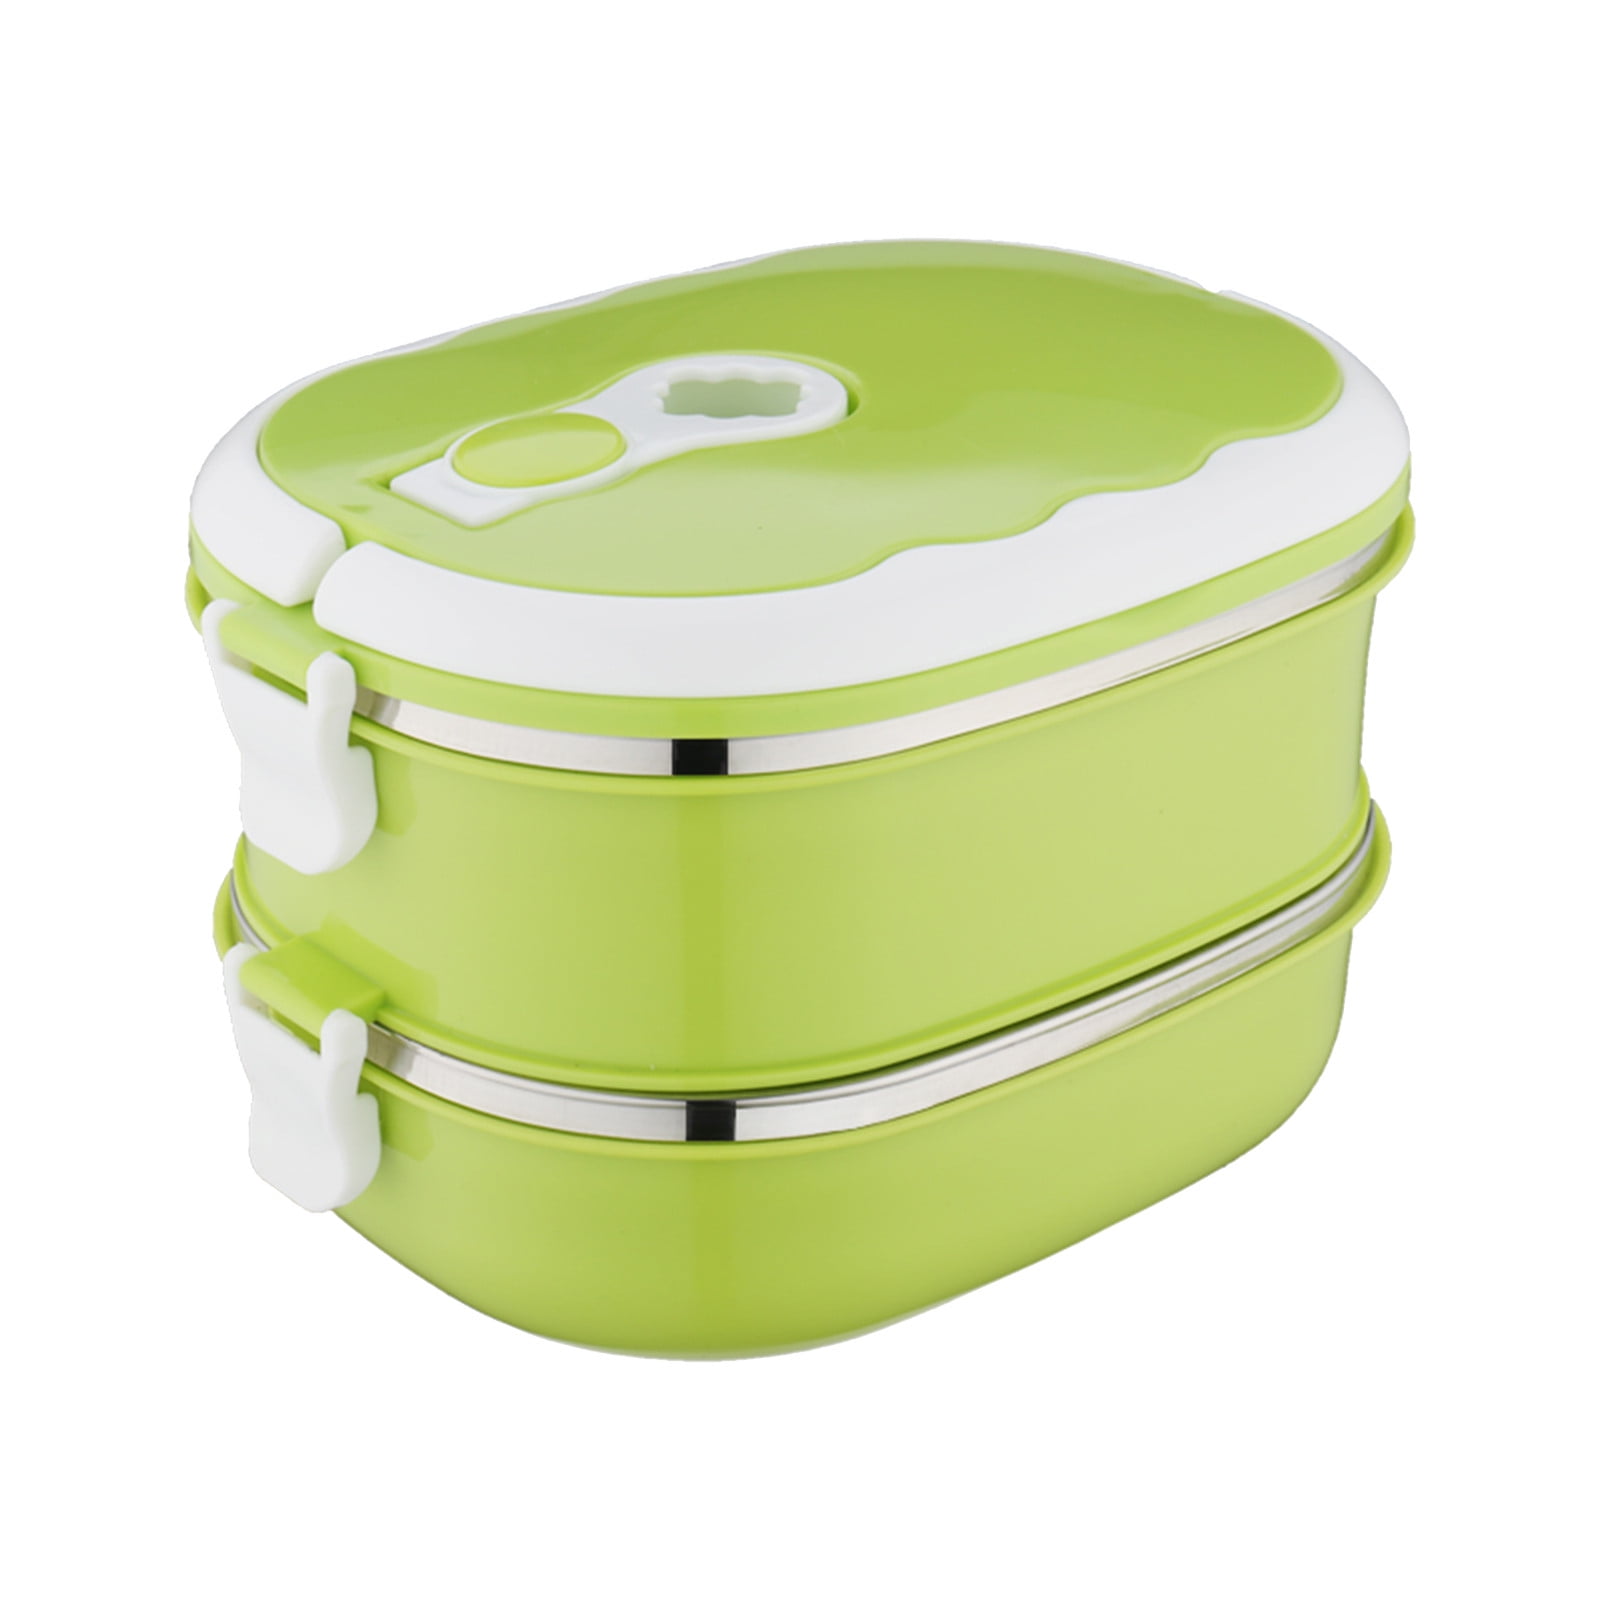 Bento Box Adult Lunch Box, Keweis Portable Insulated Lunch Box